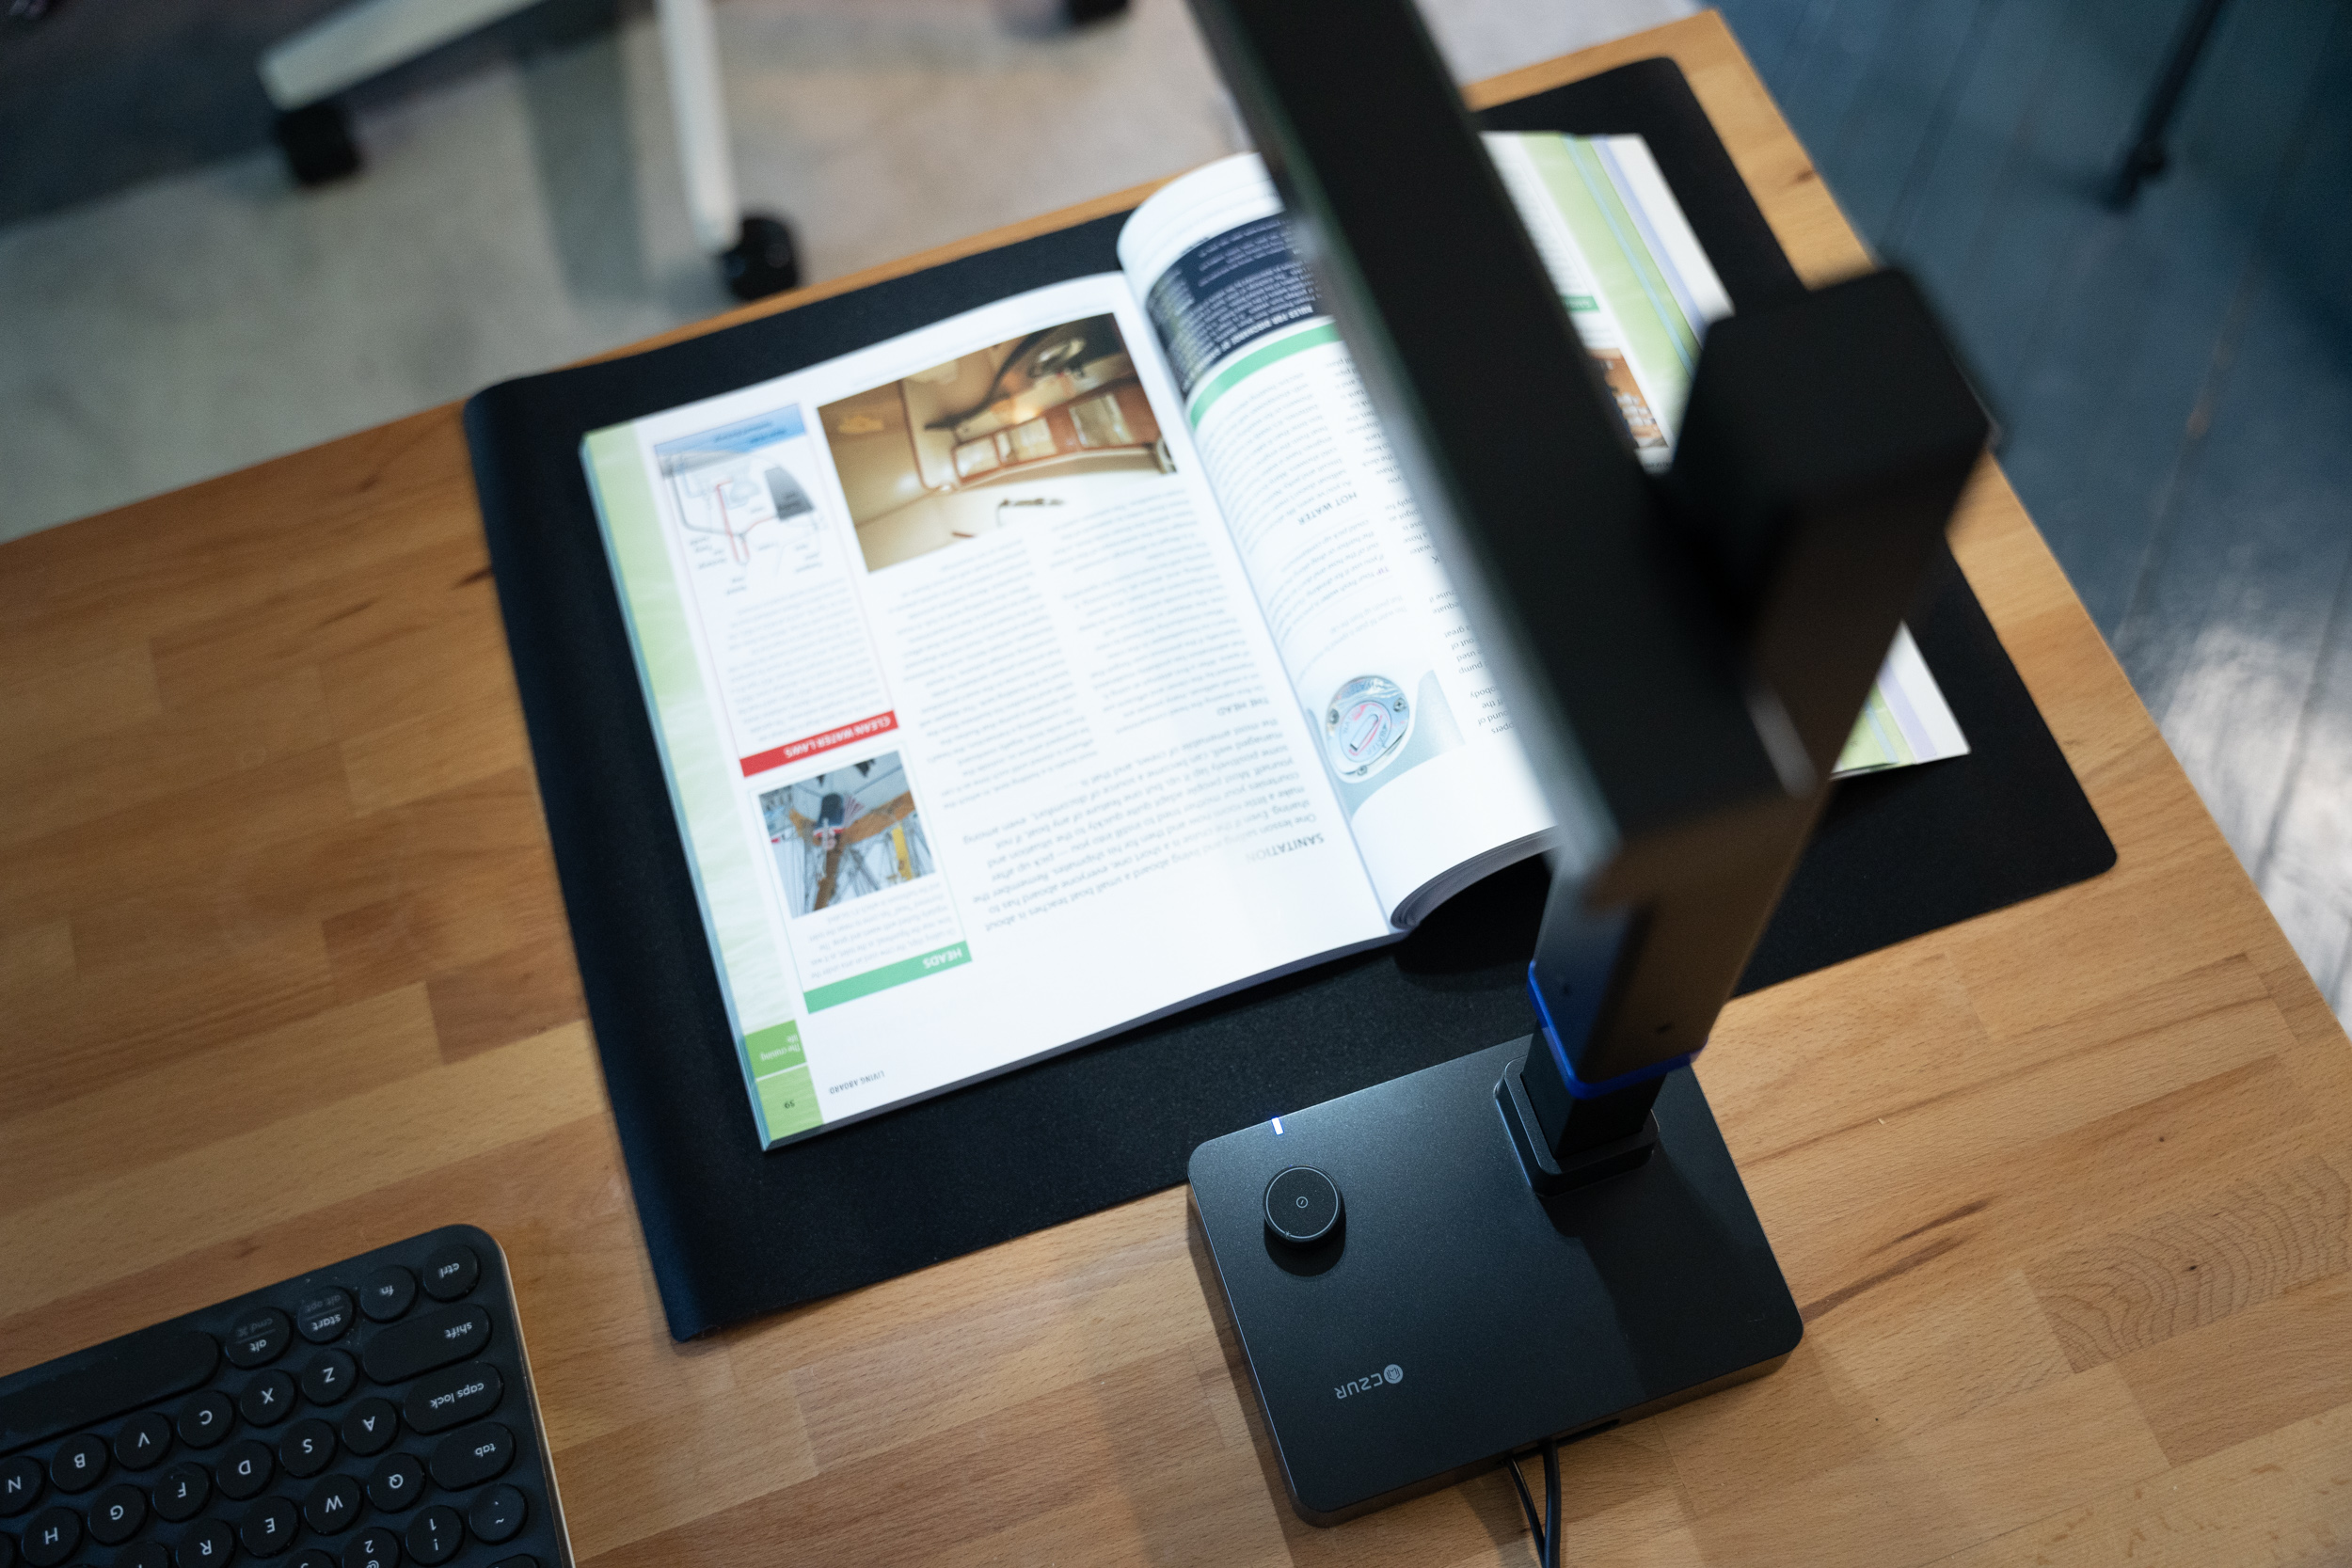 CZUR's Shine Ultra scanner makes it easy to digitize all your